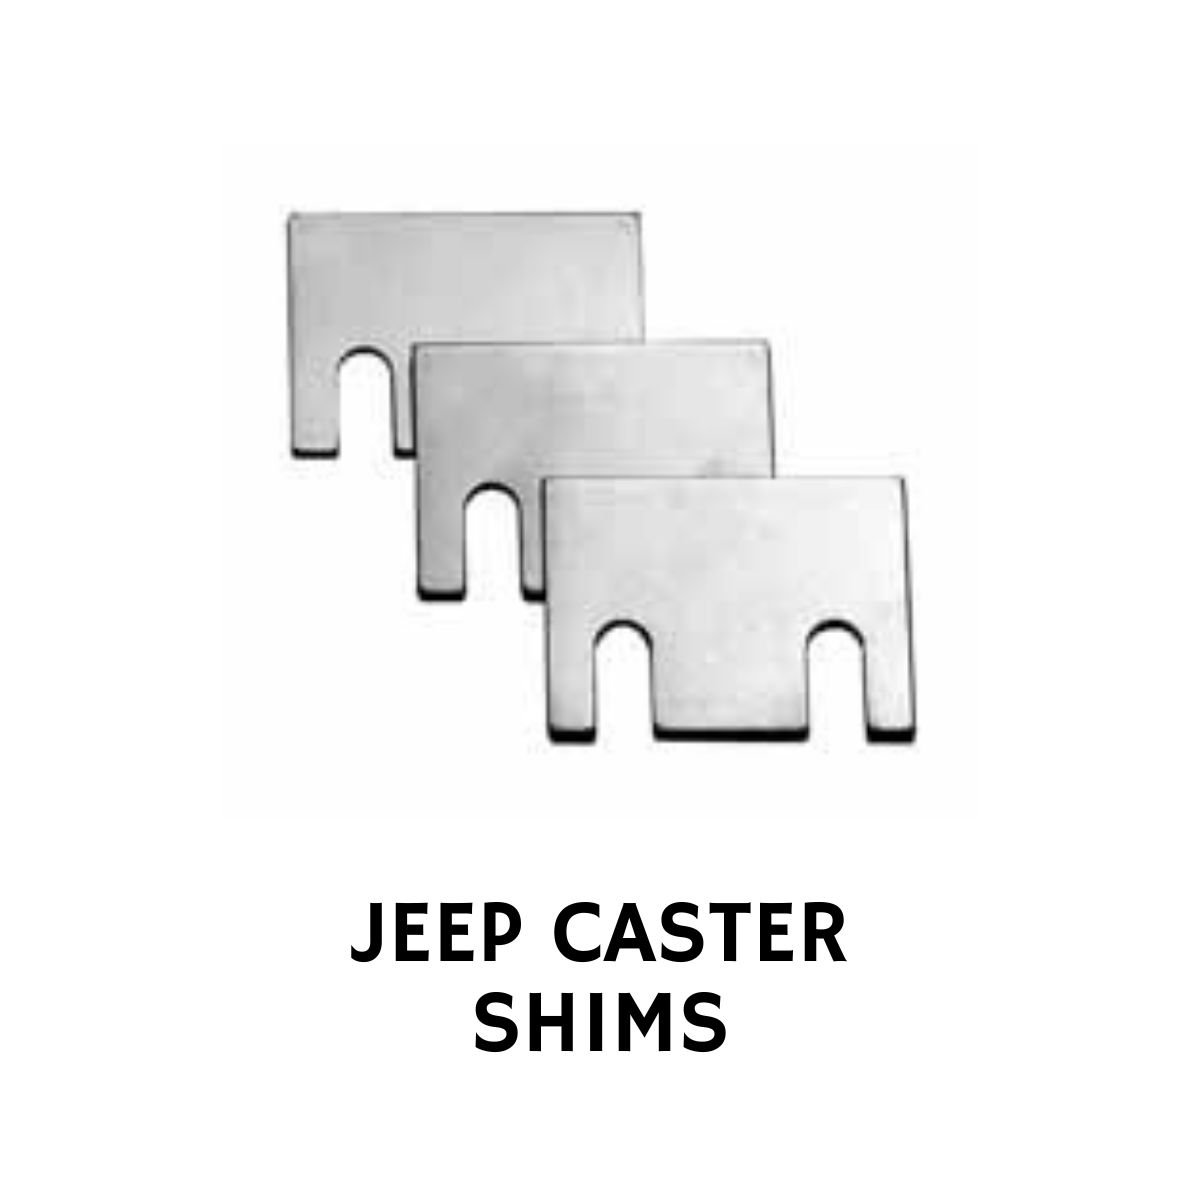 JEEP CASTER SHIMS